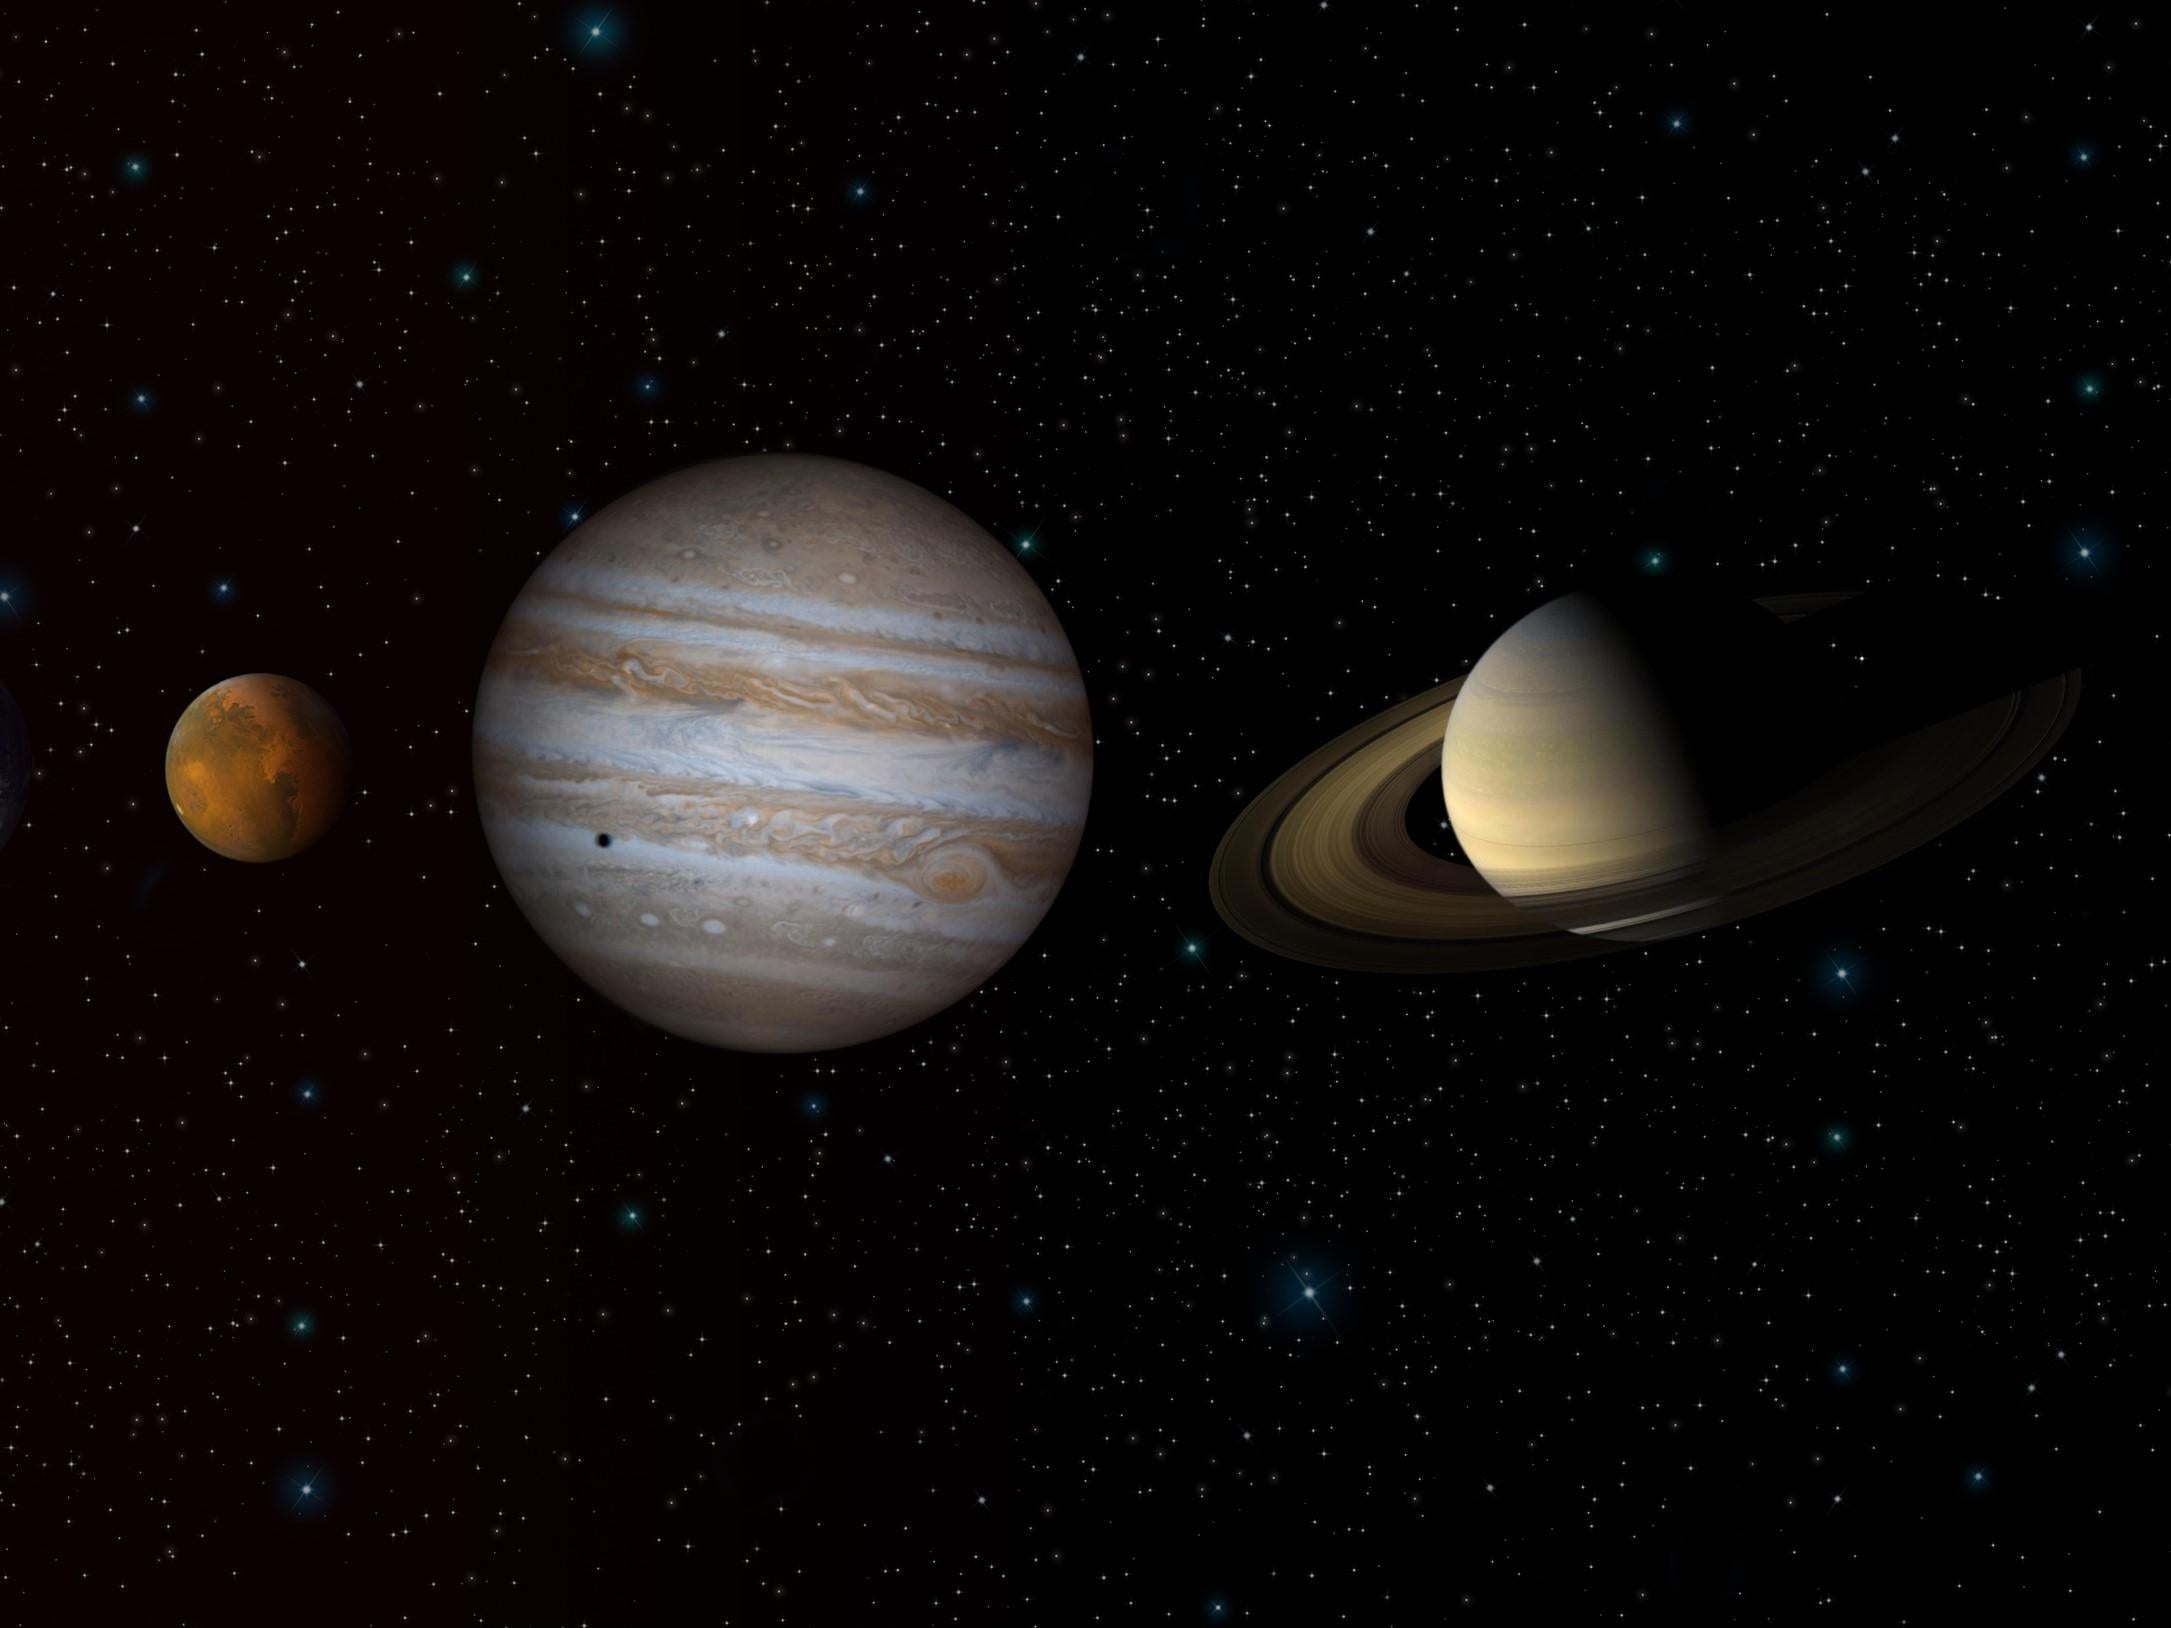 Mars, Jupiter and Saturn will all be visible in the skies over the UK this week